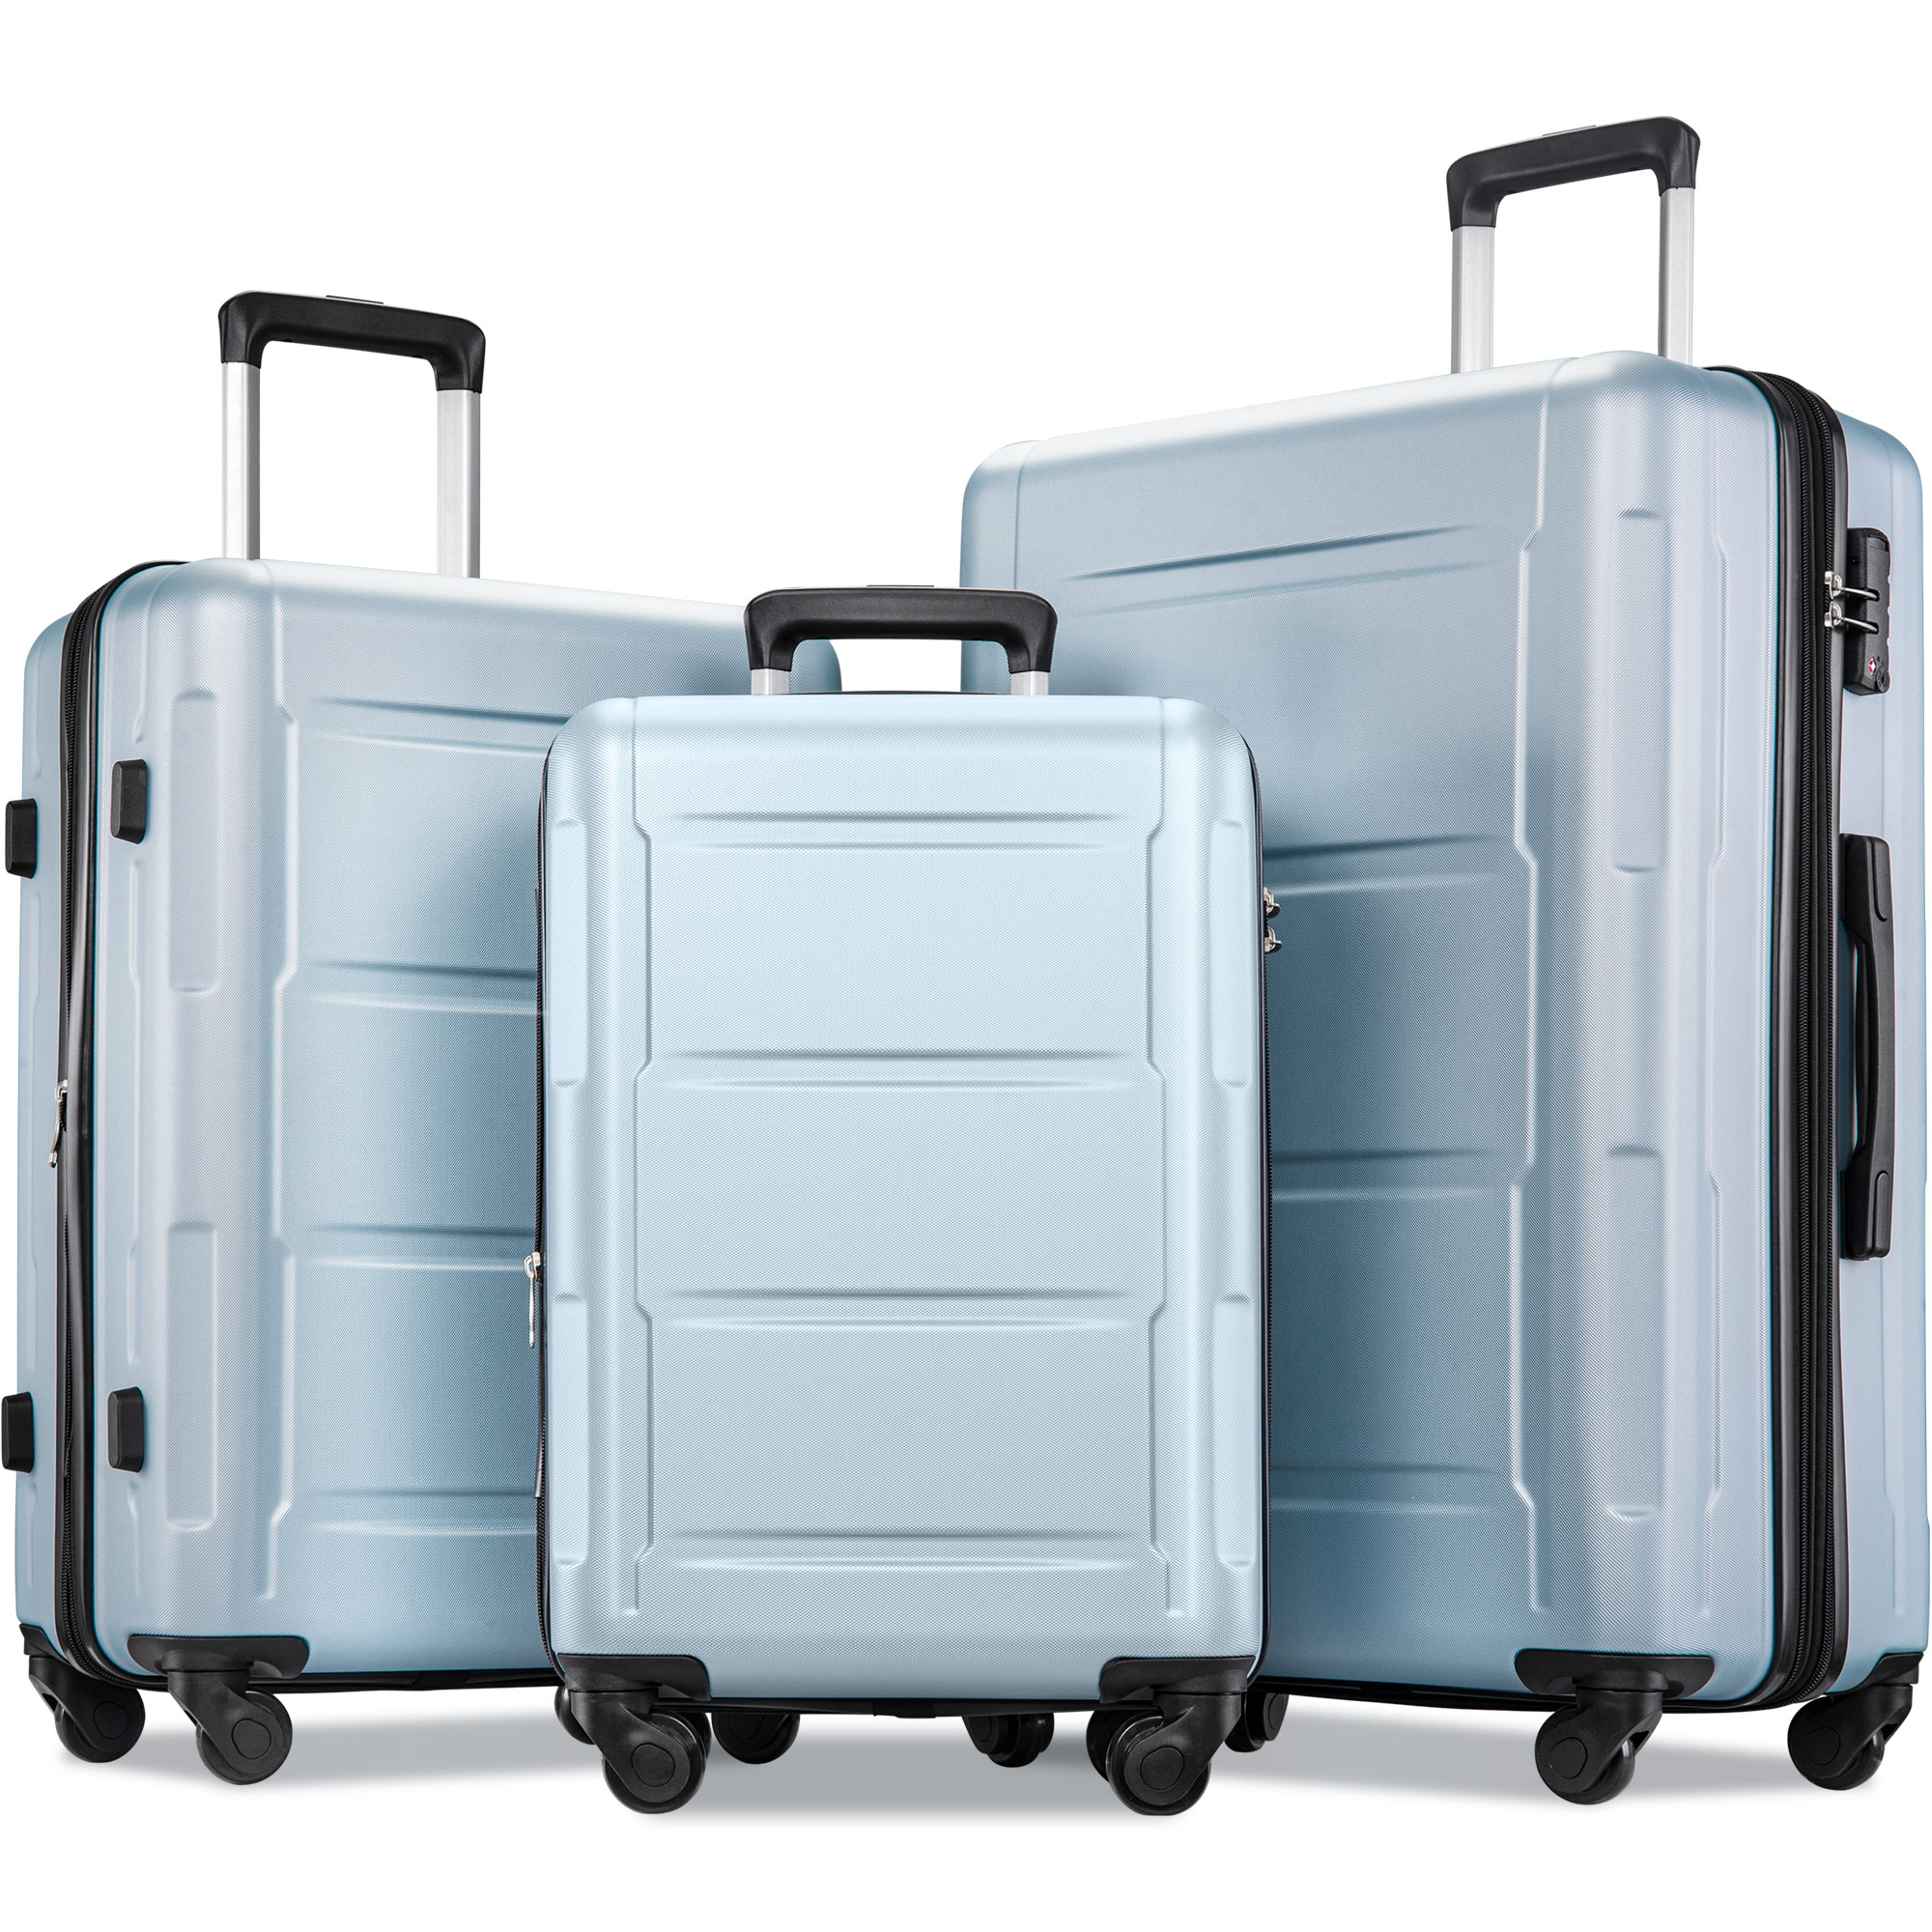 Expanable Spinner Wheel 3 Piece Luggage Set ABS Lightweight Suitcase with TSA Lock, Silver Blue-CASAINC